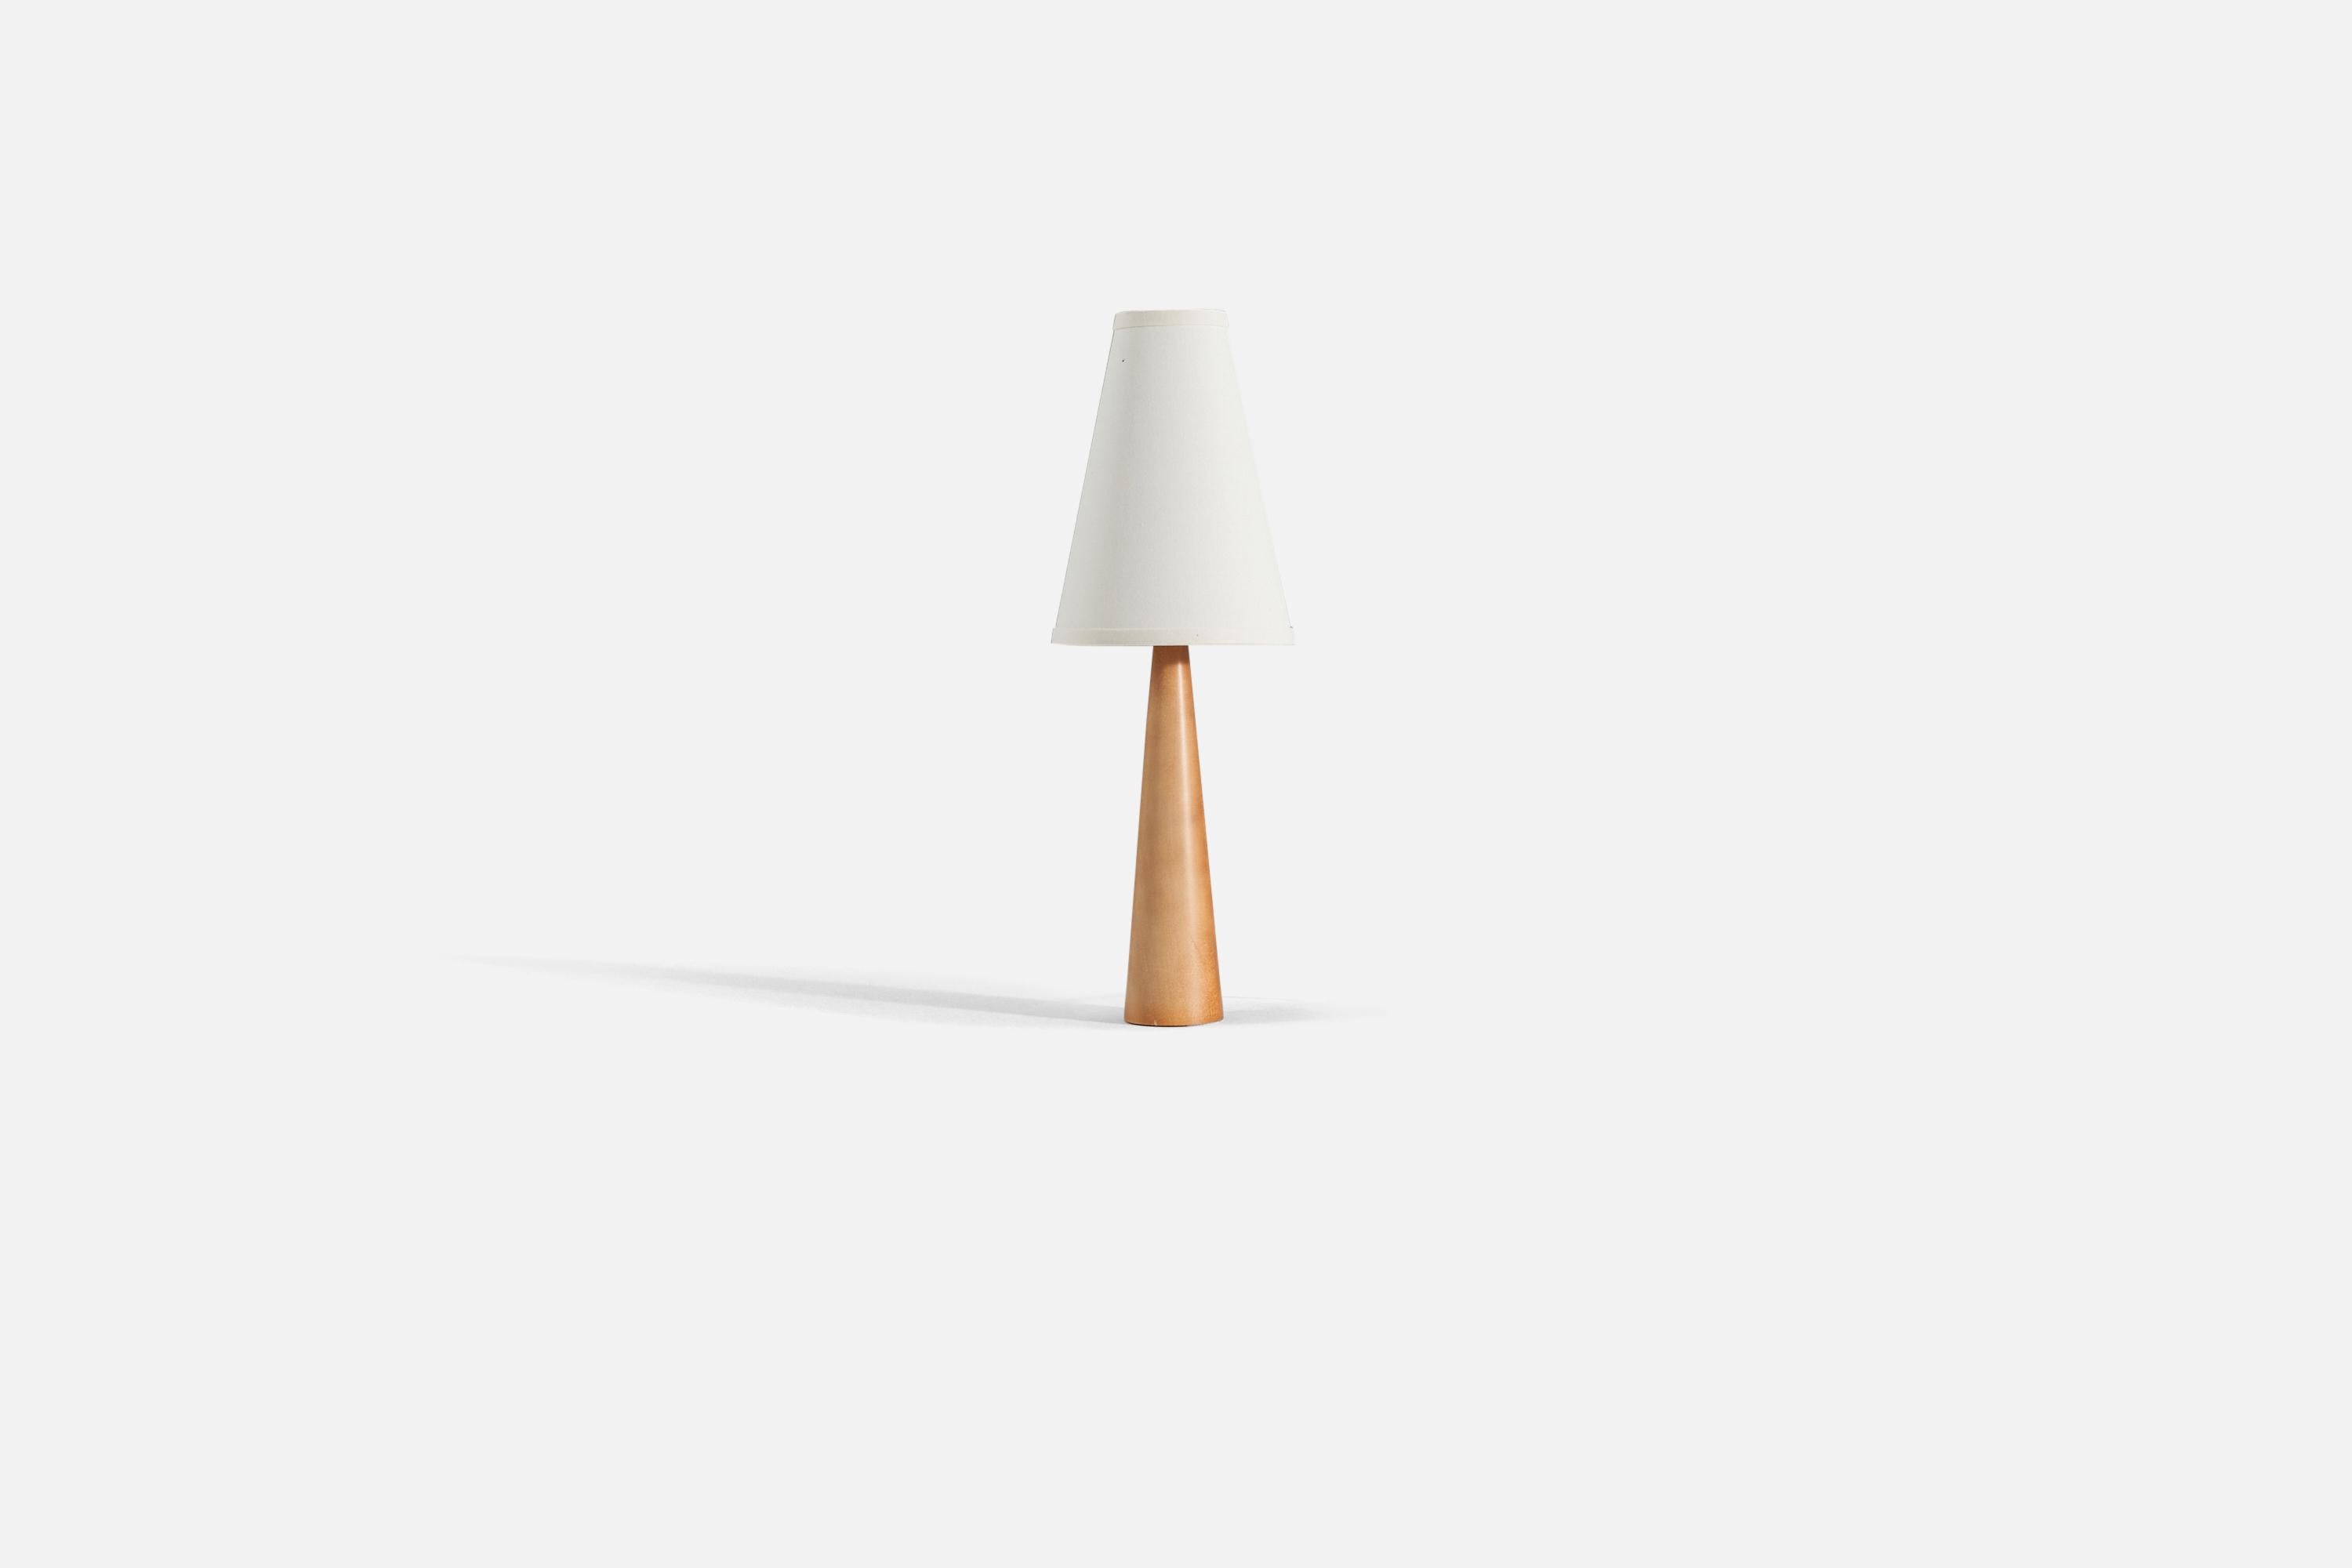 A turned solid wood table lamp designed and produced in Sweden, 1970s.

Lampshade not included. 

Measurements listed are of lamp only. 
For reference. 
Shade : 3.25 x 7.25 x 10
Lamp with shade : 21 x 7.25 x 7.25.